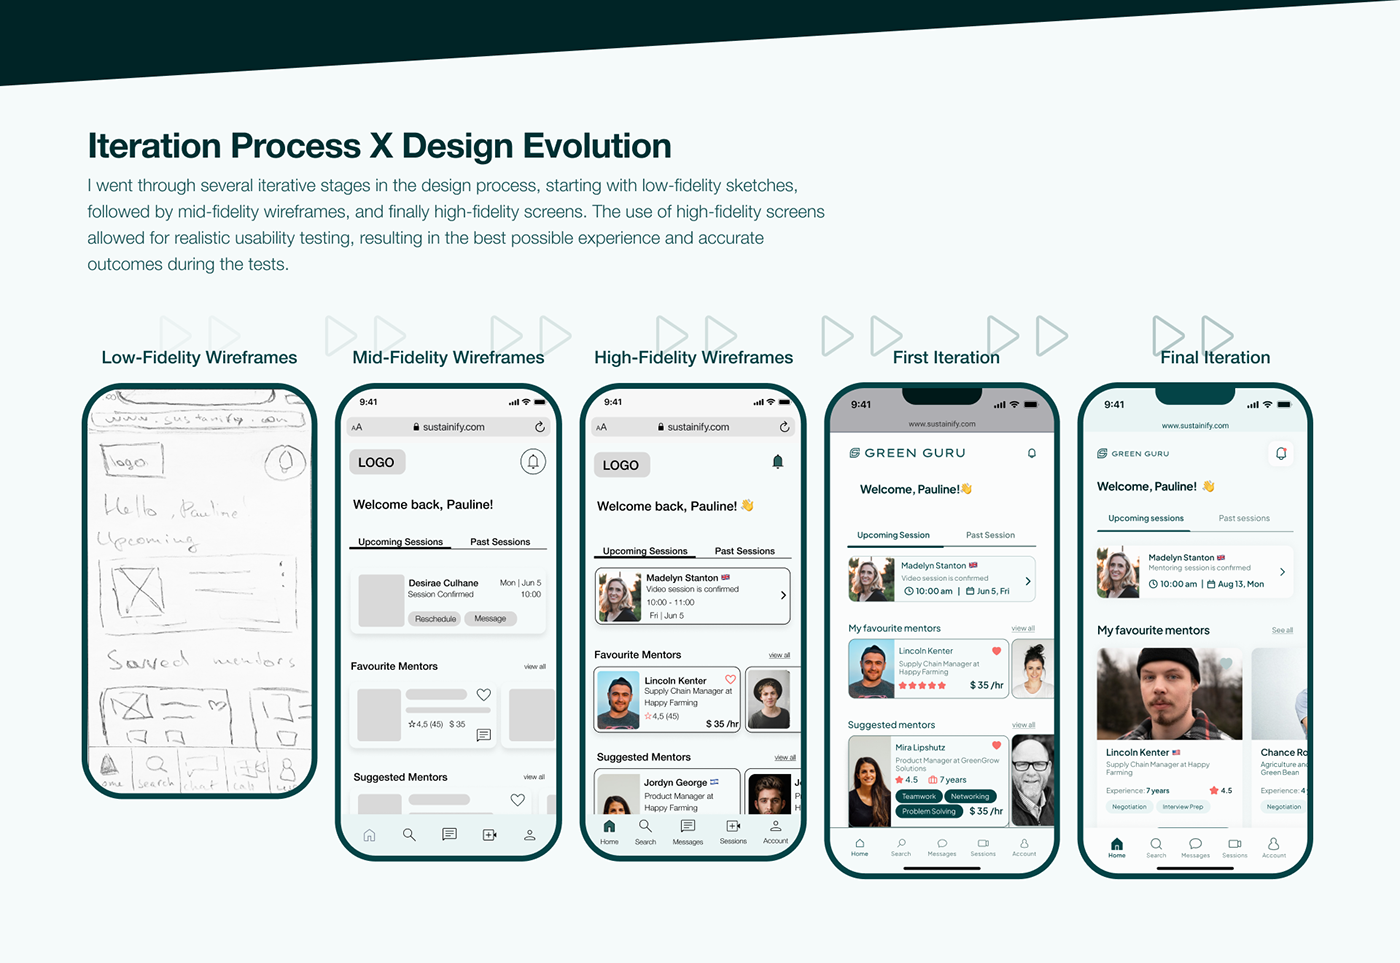 UI/UX Figma UX design user experience Case Study ux ui design Sustainability climate change Mentor